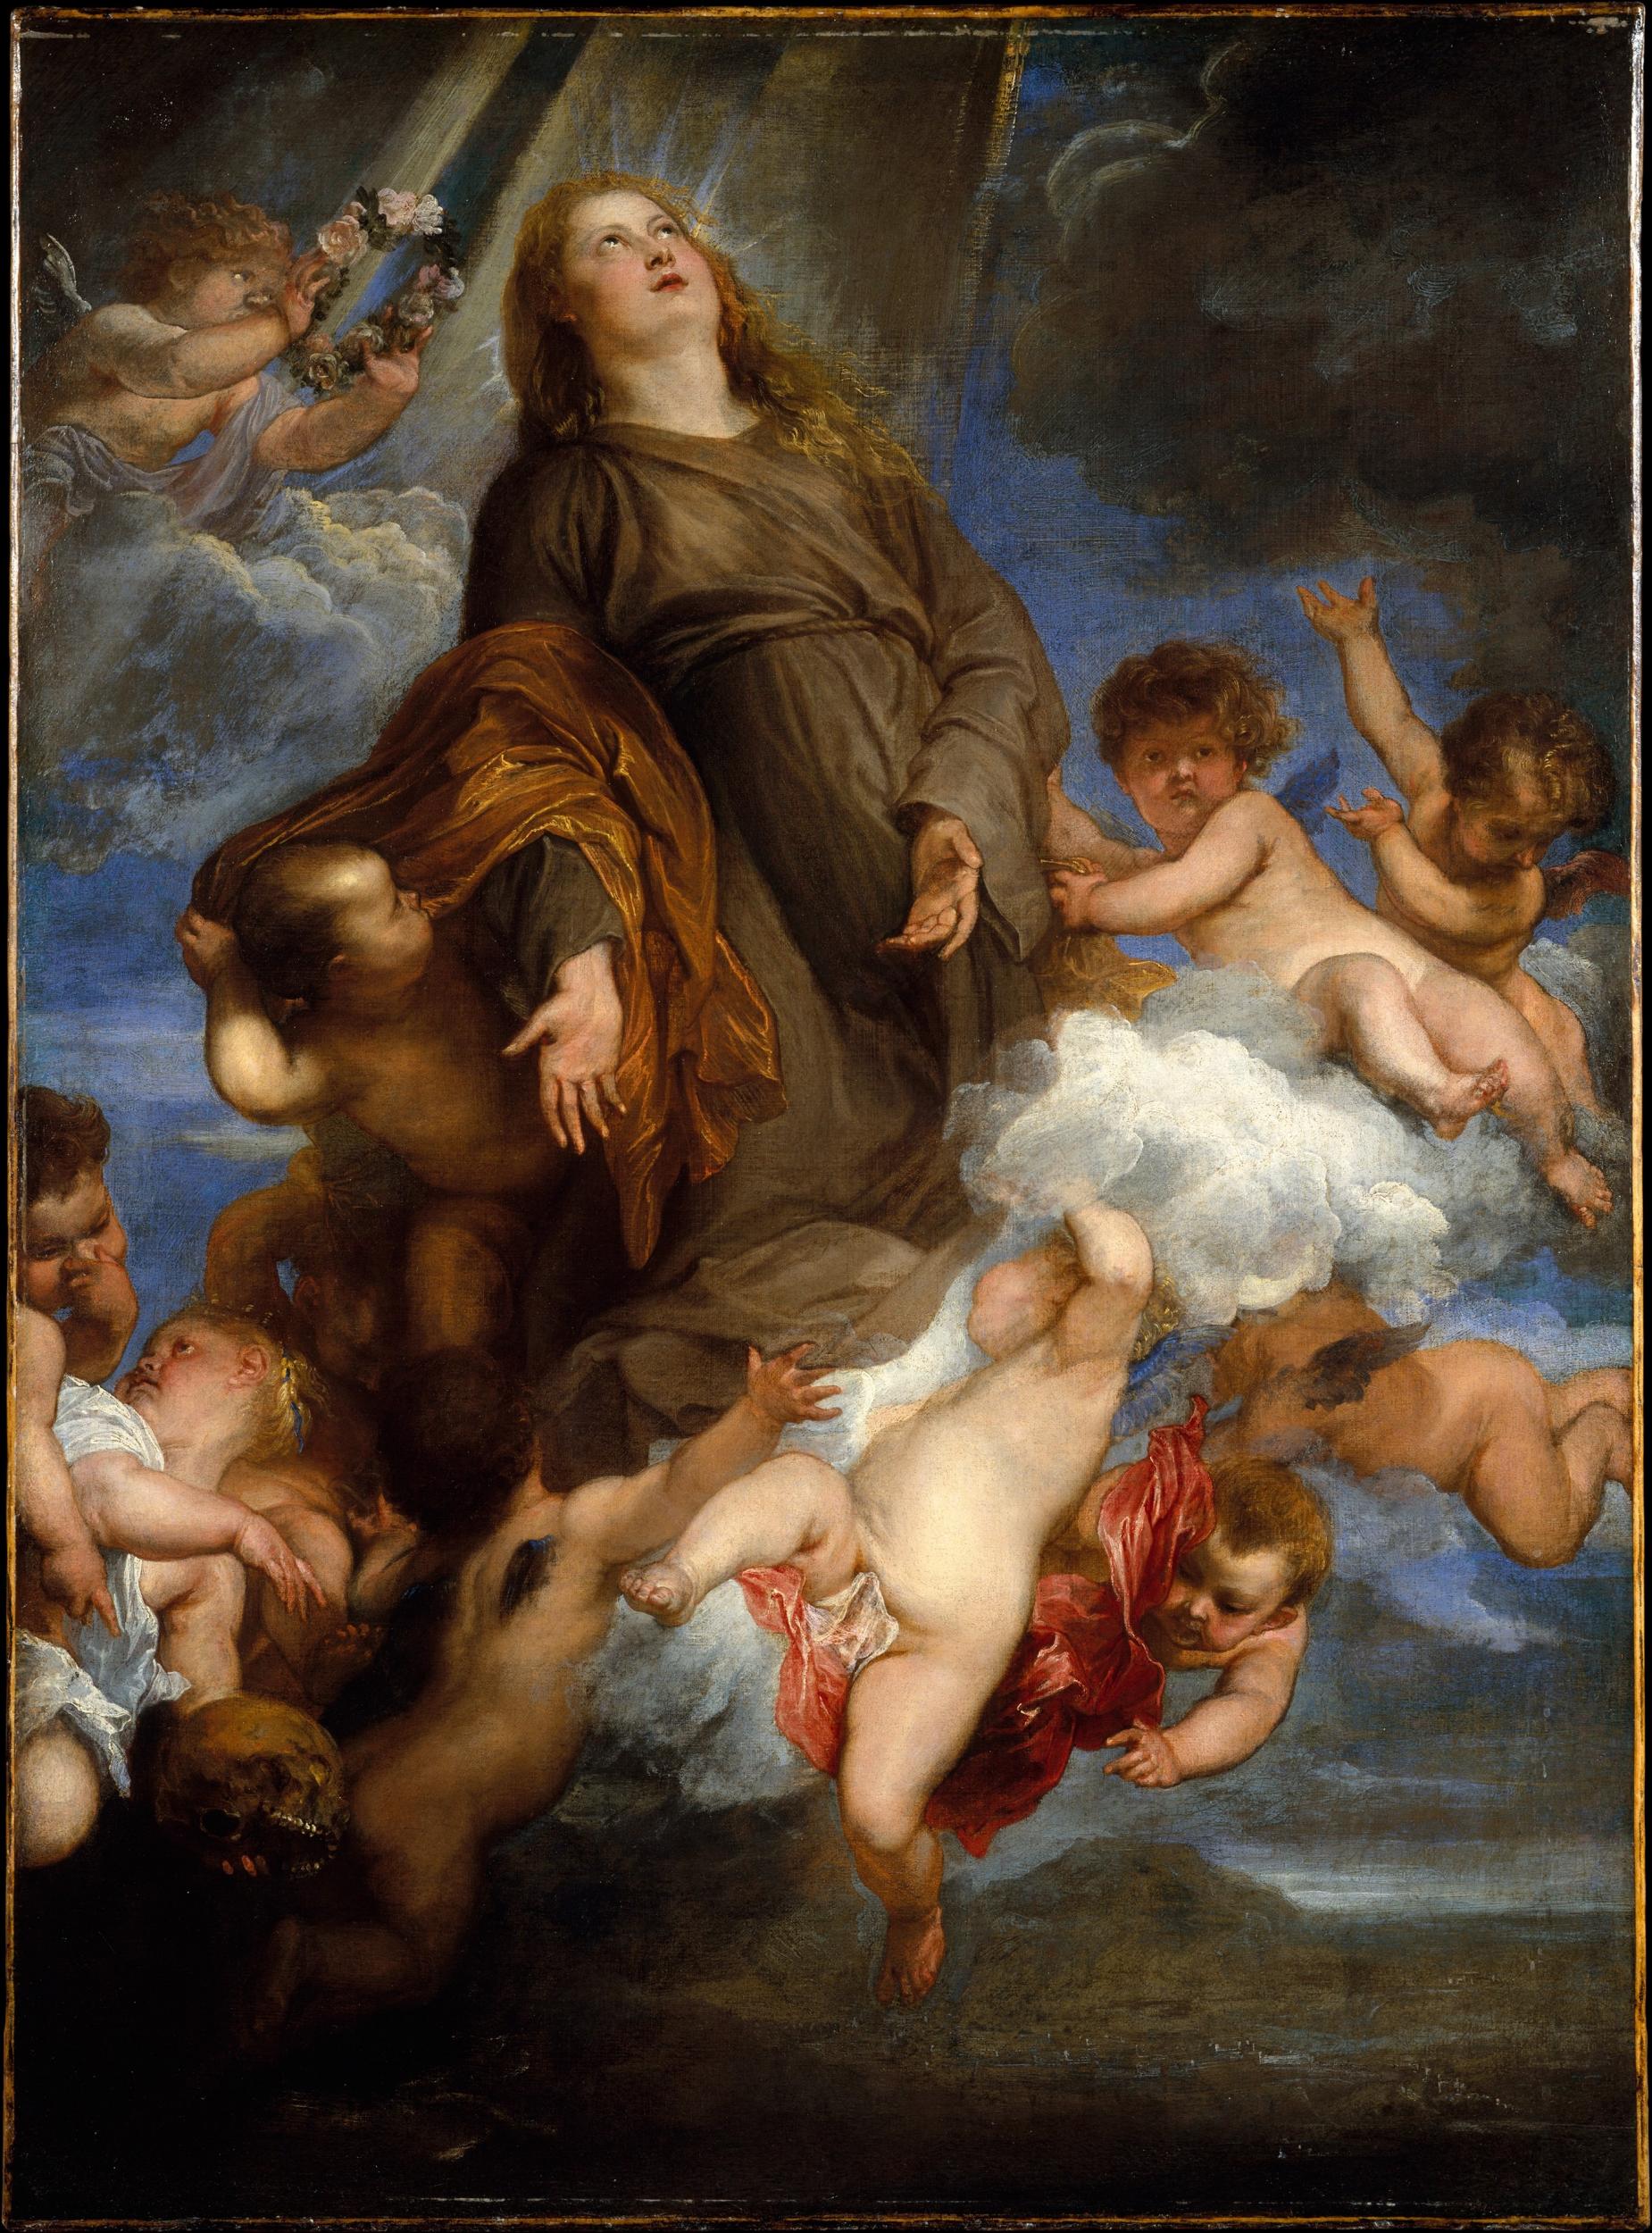 Van Dyck crafted an incarnation of beneficence in chaos (The Metropolitan Museum of Art)